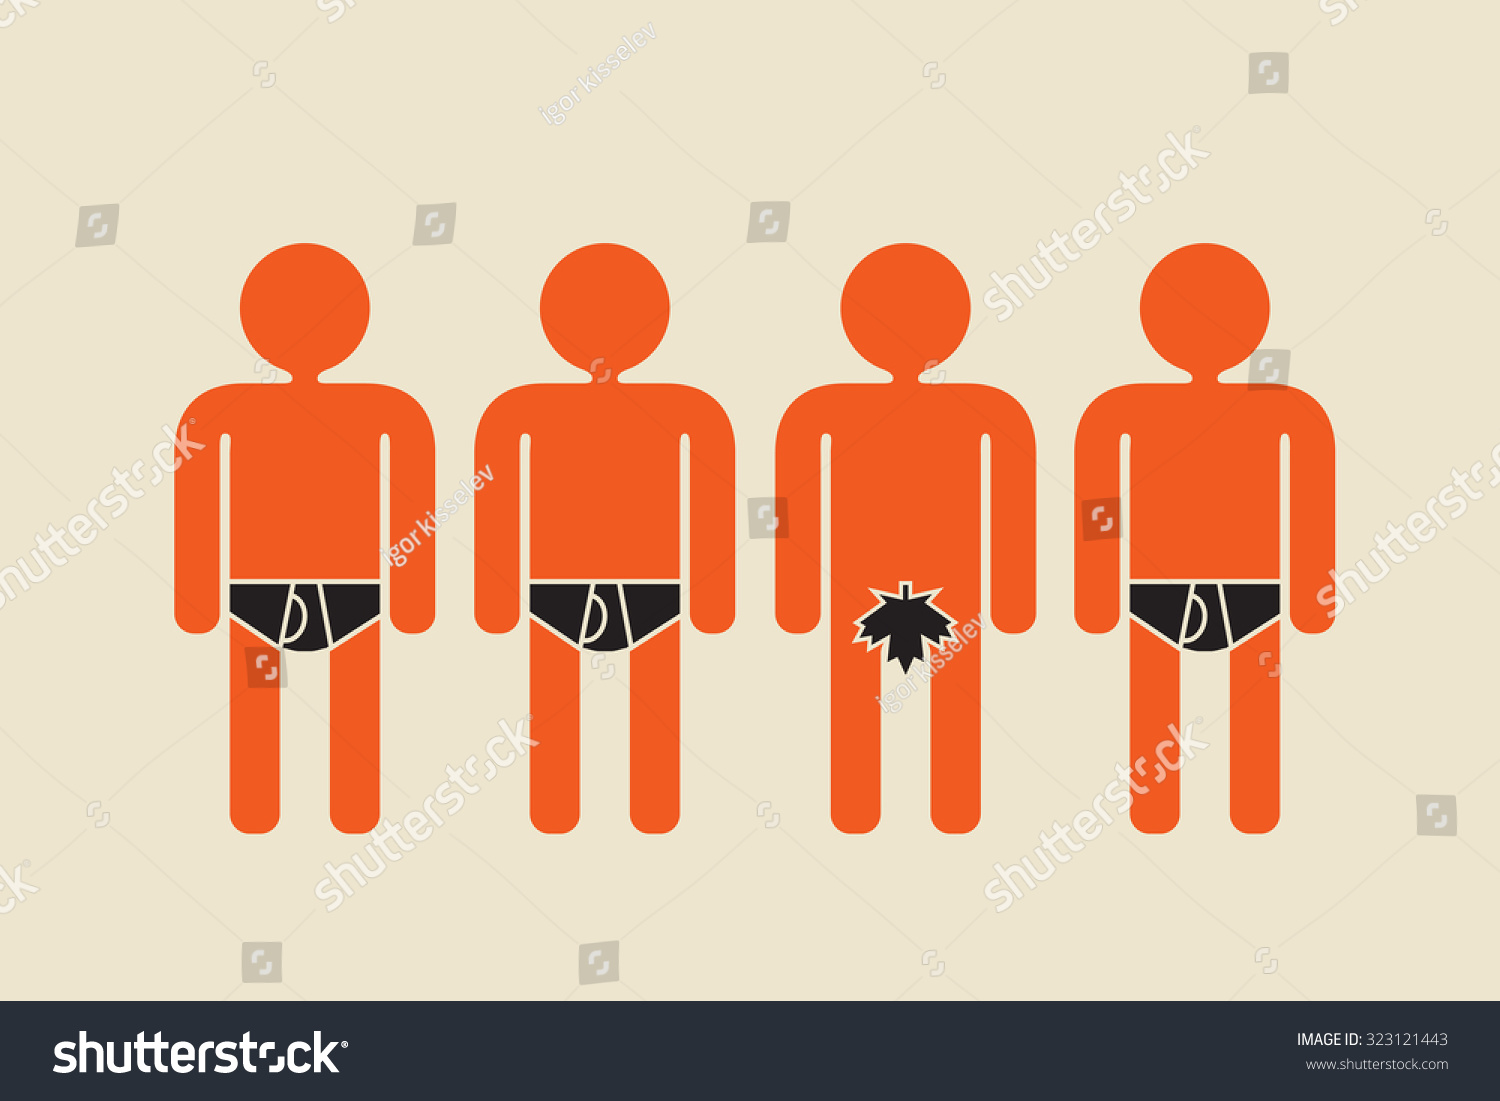 Naked Man Standing Crowd People Wearing Stock Vector Royalty Free 323121443 Shutterstock